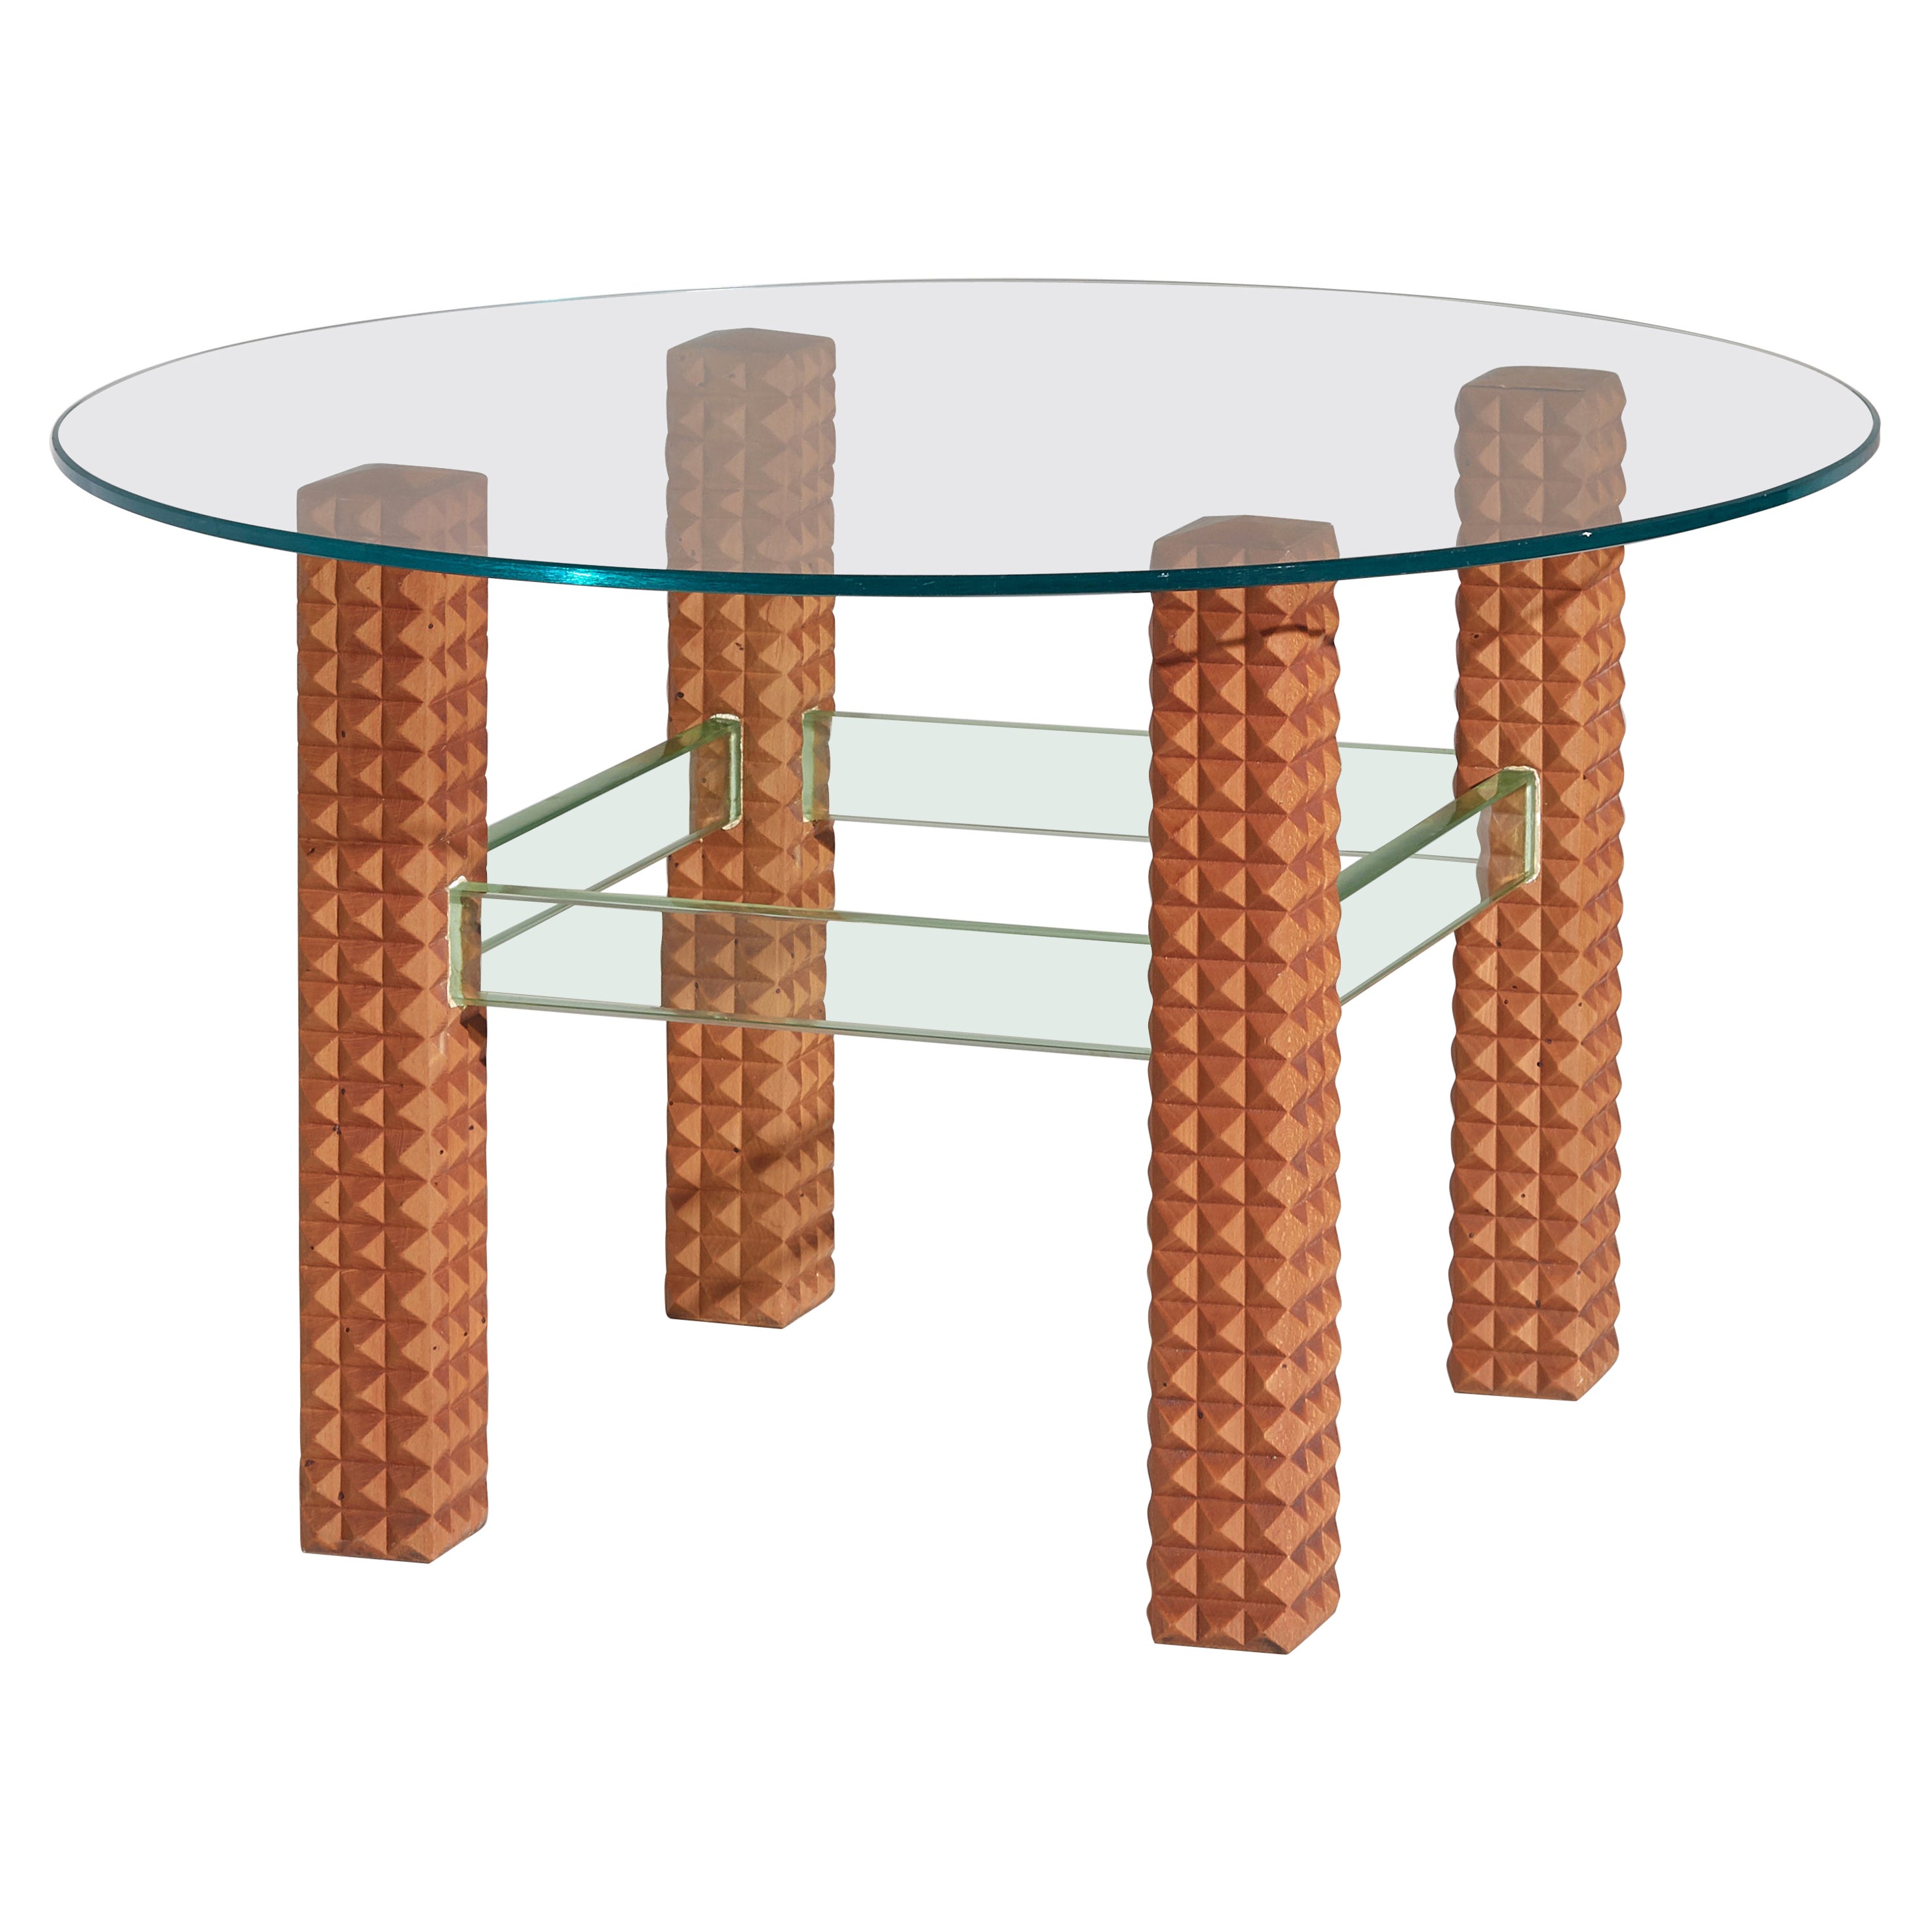 Midcentury Italian Glass Coffee Table with Diamond Shaped Wooden Legs, 1960s For Sale